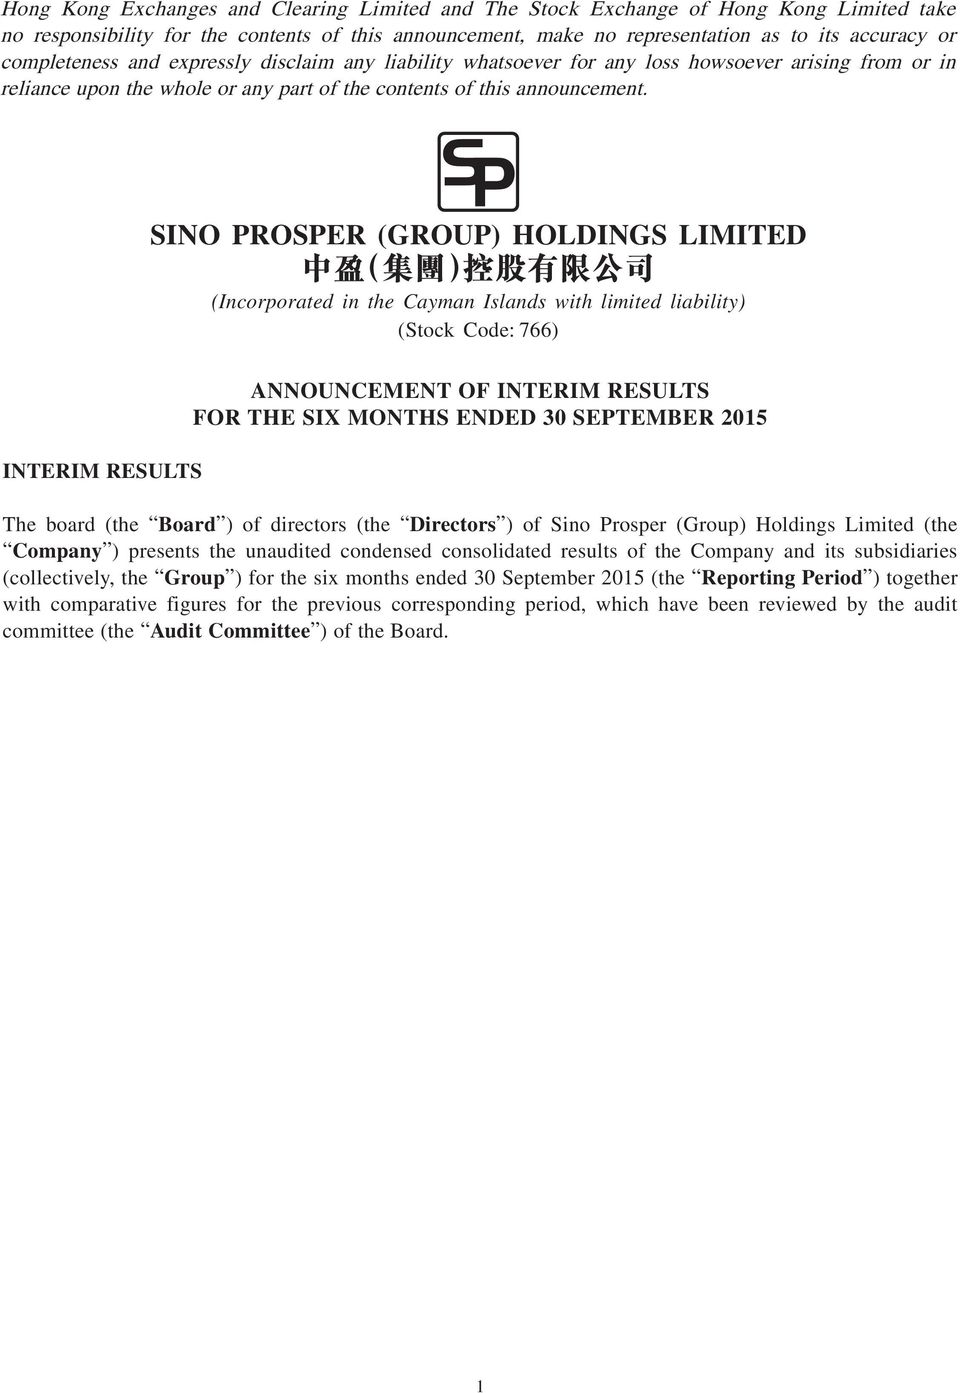 SINO PROSPER (GROUP) HOLDINGS LIMITED (Incorporated in the Cayman Islands with limited liability) (Stock Code: 766) INTERIM RESULTS ANNOUNCEMENT OF INTERIM RESULTS FOR THE SIX MONTHS ENDED 30